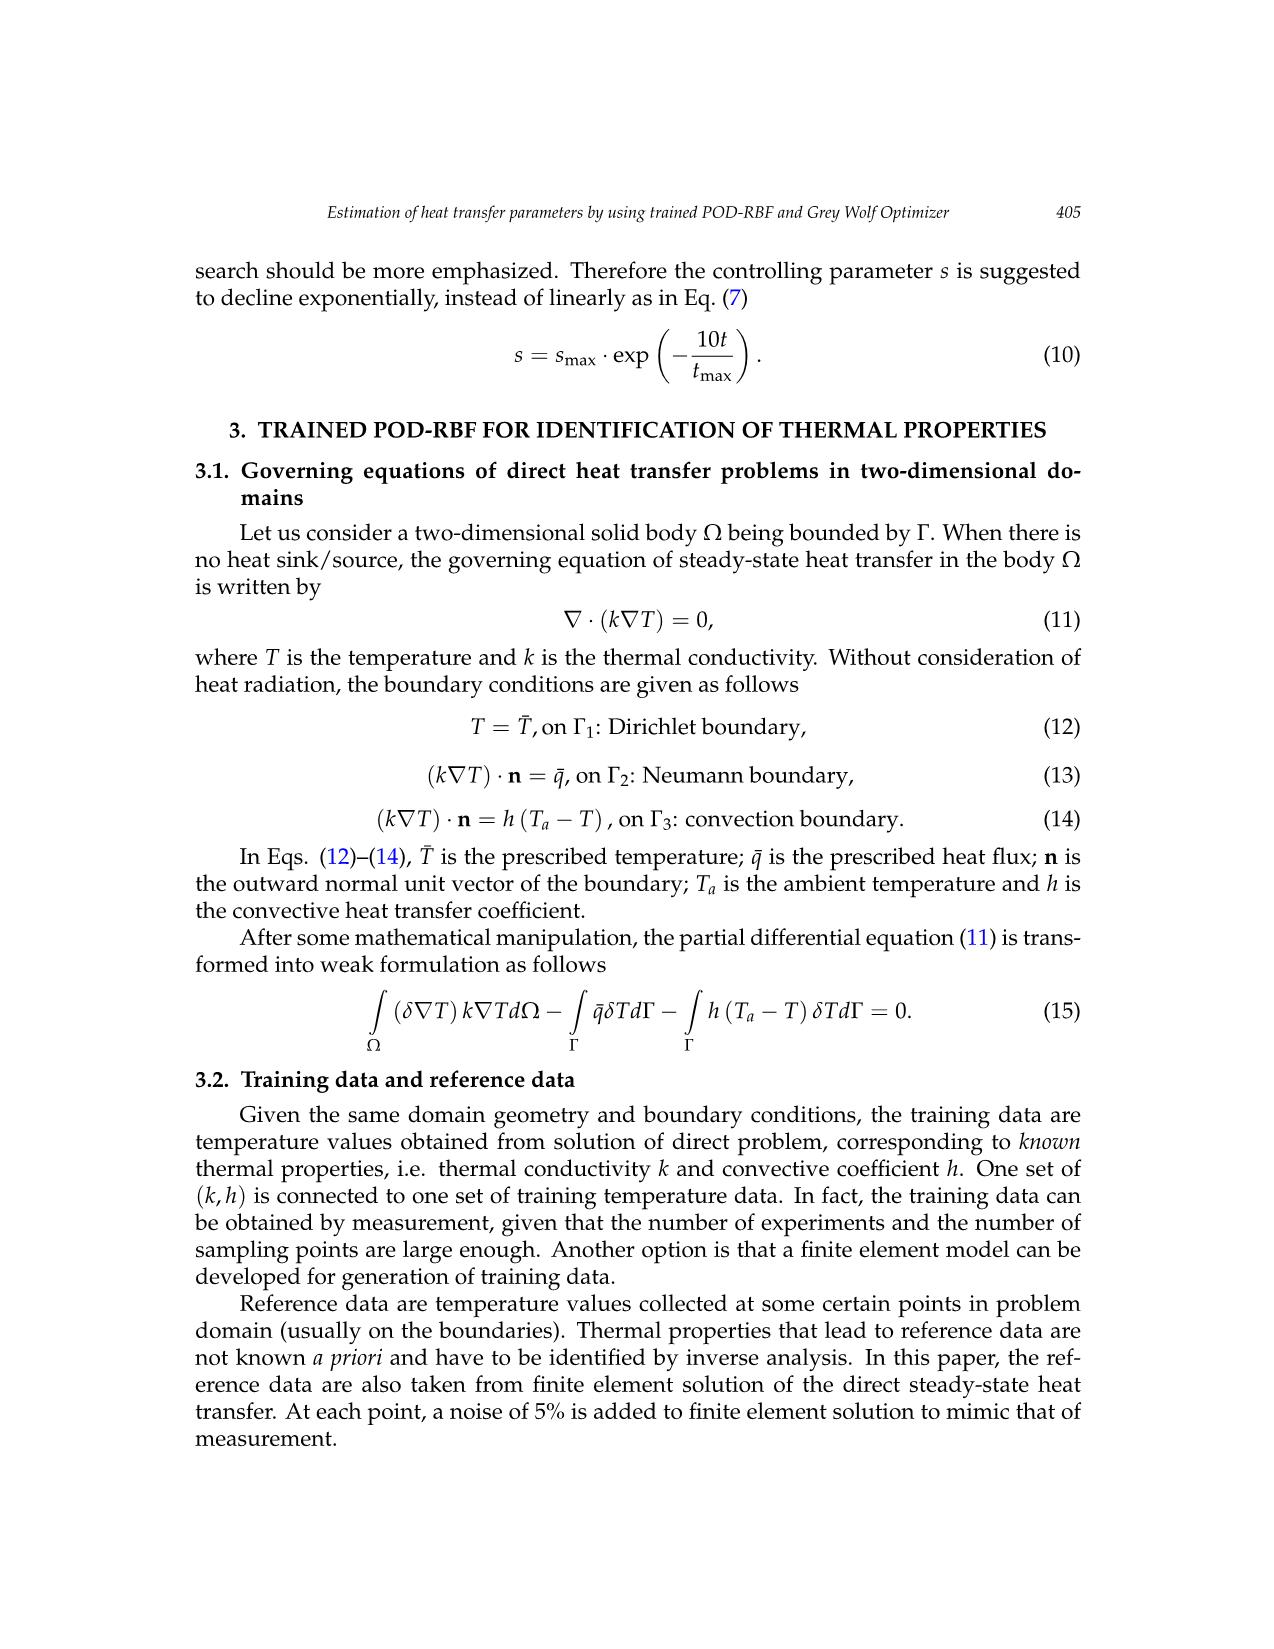 Estimation of heat transfer parameters by using trained pod - rbf and grey wolf optimizer trang 5